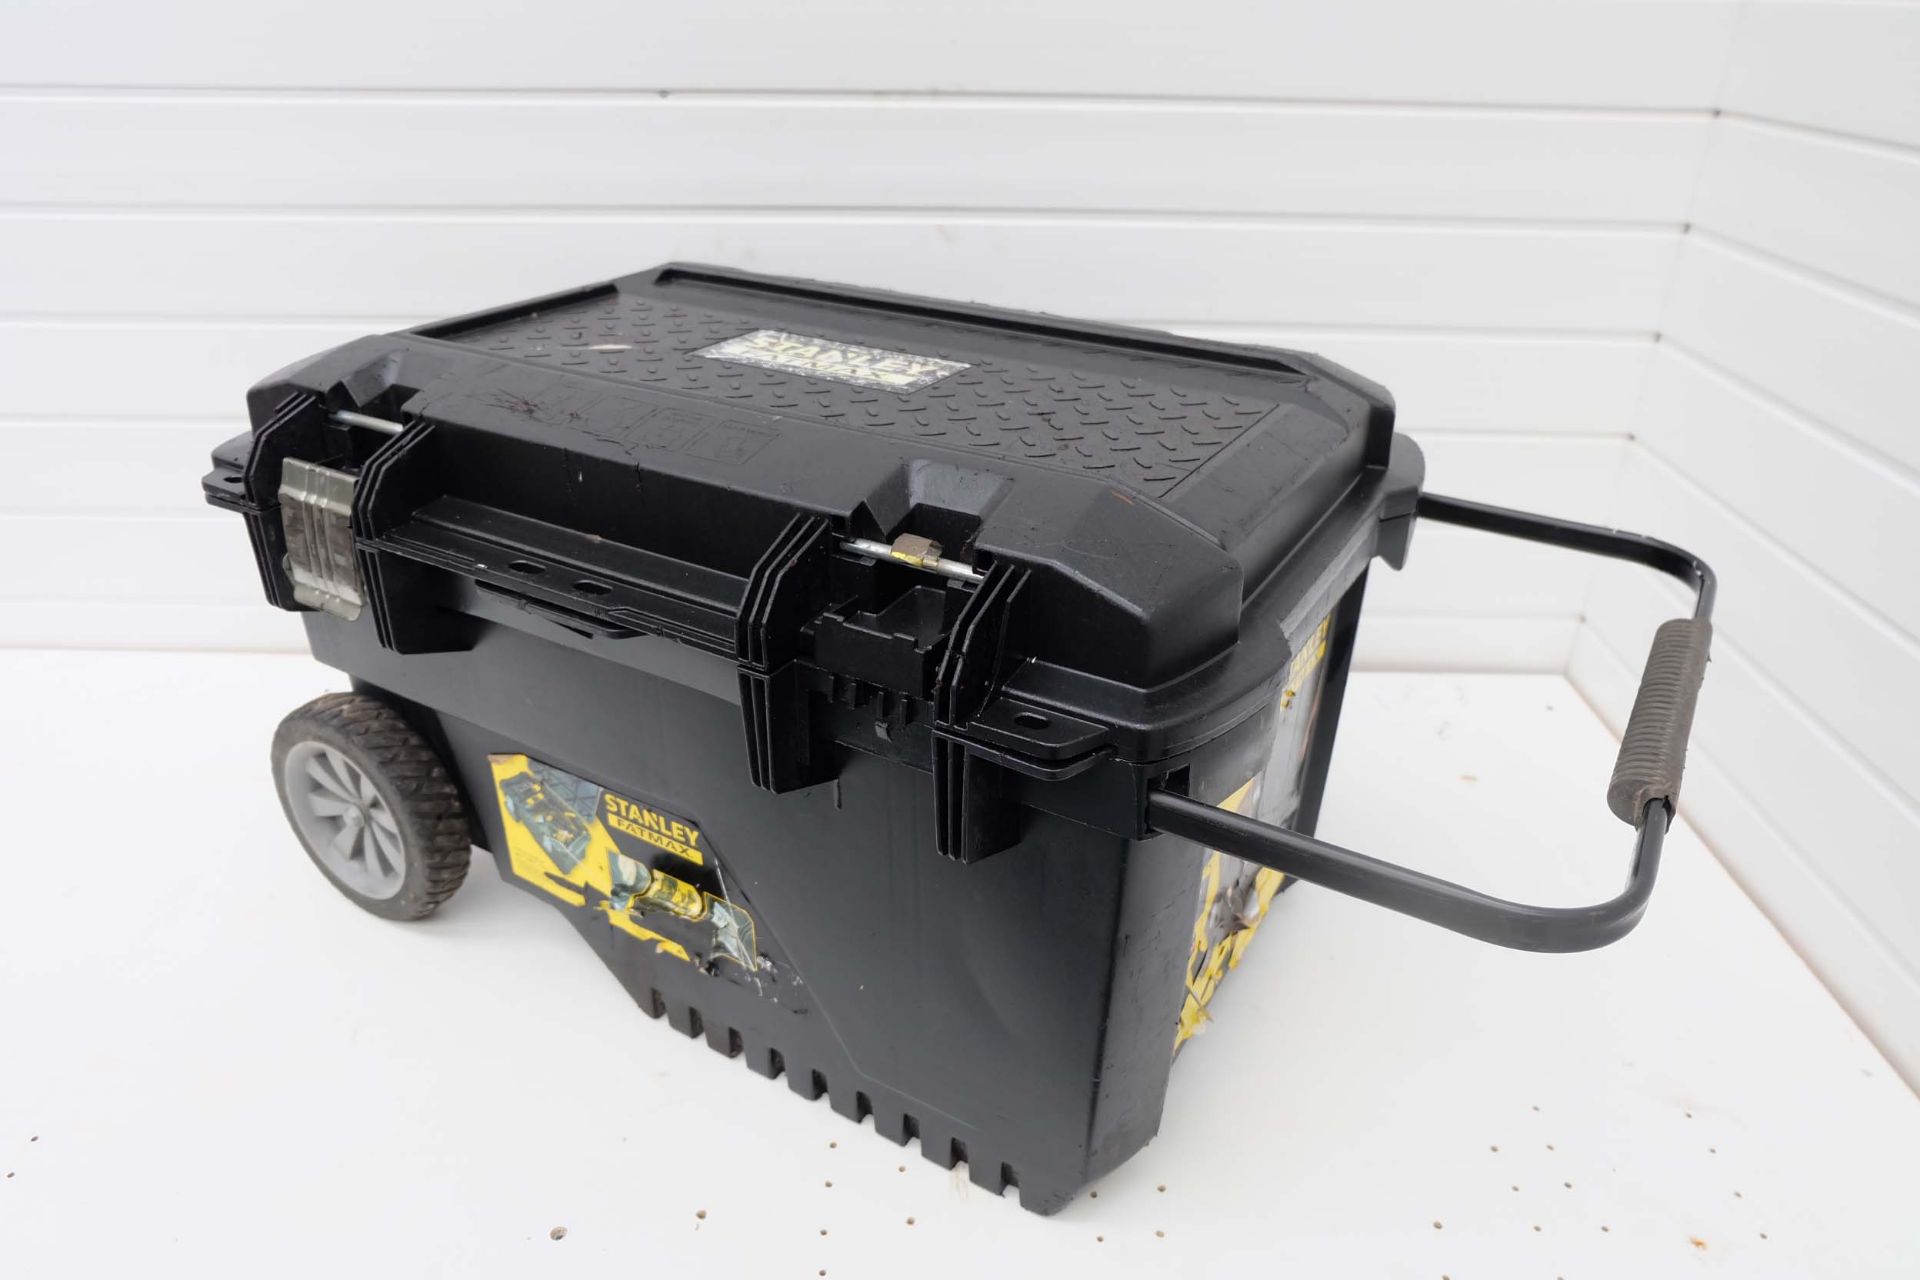 Stanley Fatmax Mobile Tool Box. Size 29" x 20" x 16". - Image 2 of 6